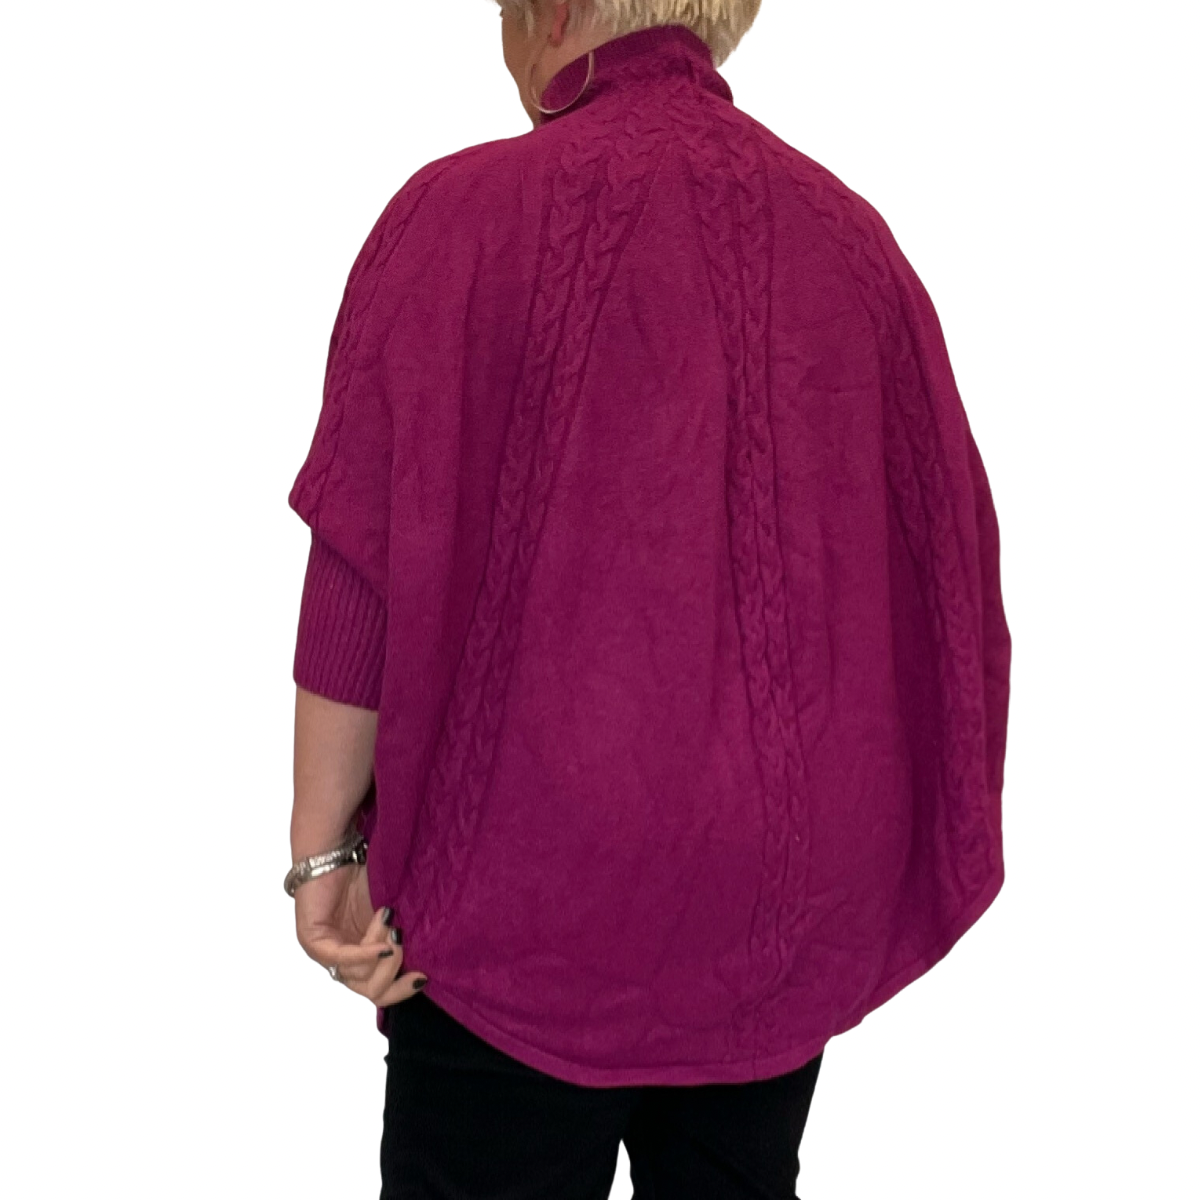 CABLE SUPER SOFT KNITTED TURTLE NECK PONCHO / JUMPER